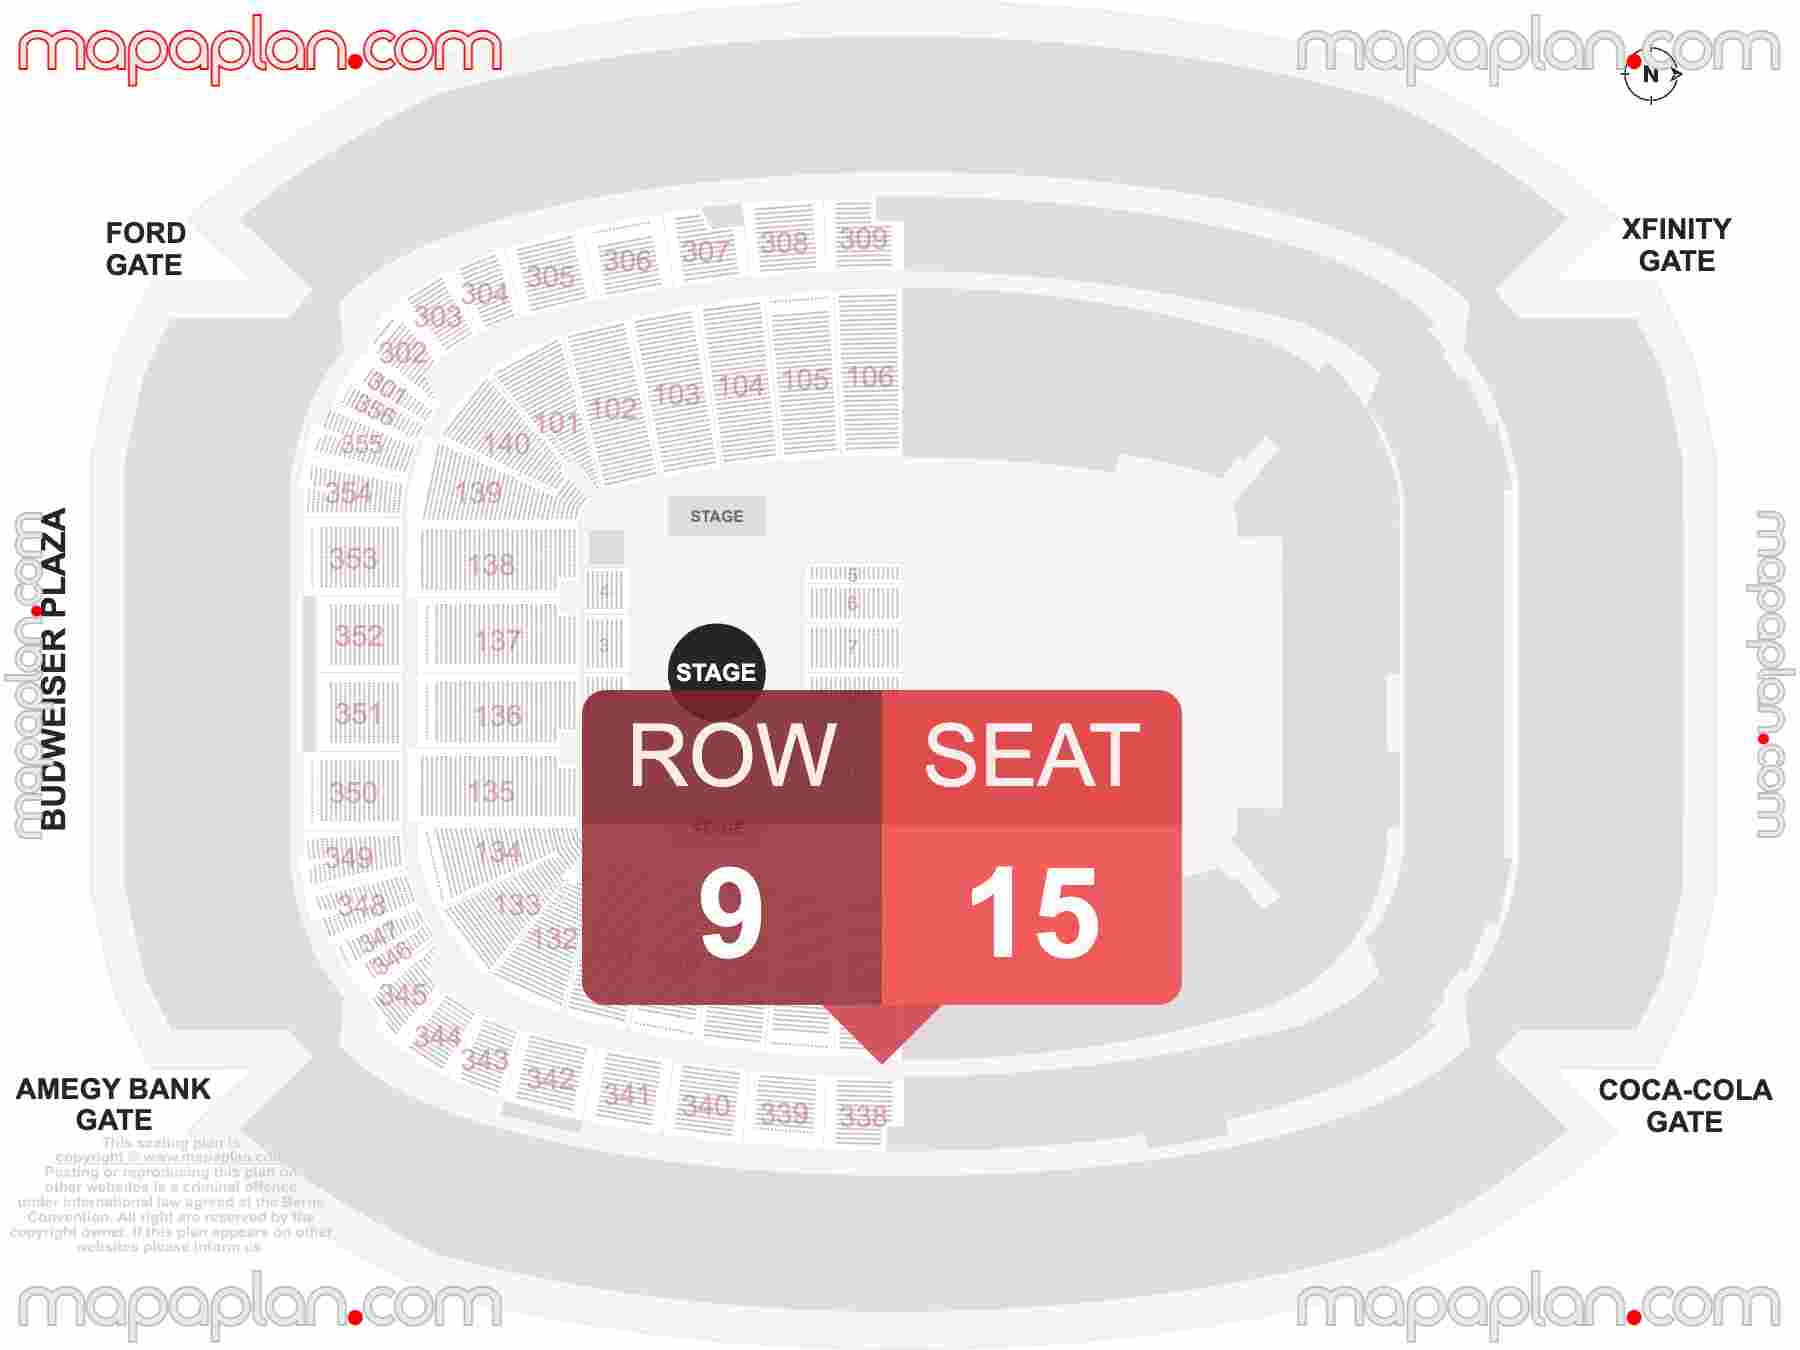 Houston NRG Stadium seating chart Ringling Bros and Barnum & Bailey circus seating chart with exact section numbers showing best rows and seats selection 3d layout - Best interactive seat finder tool with precise detailed location data